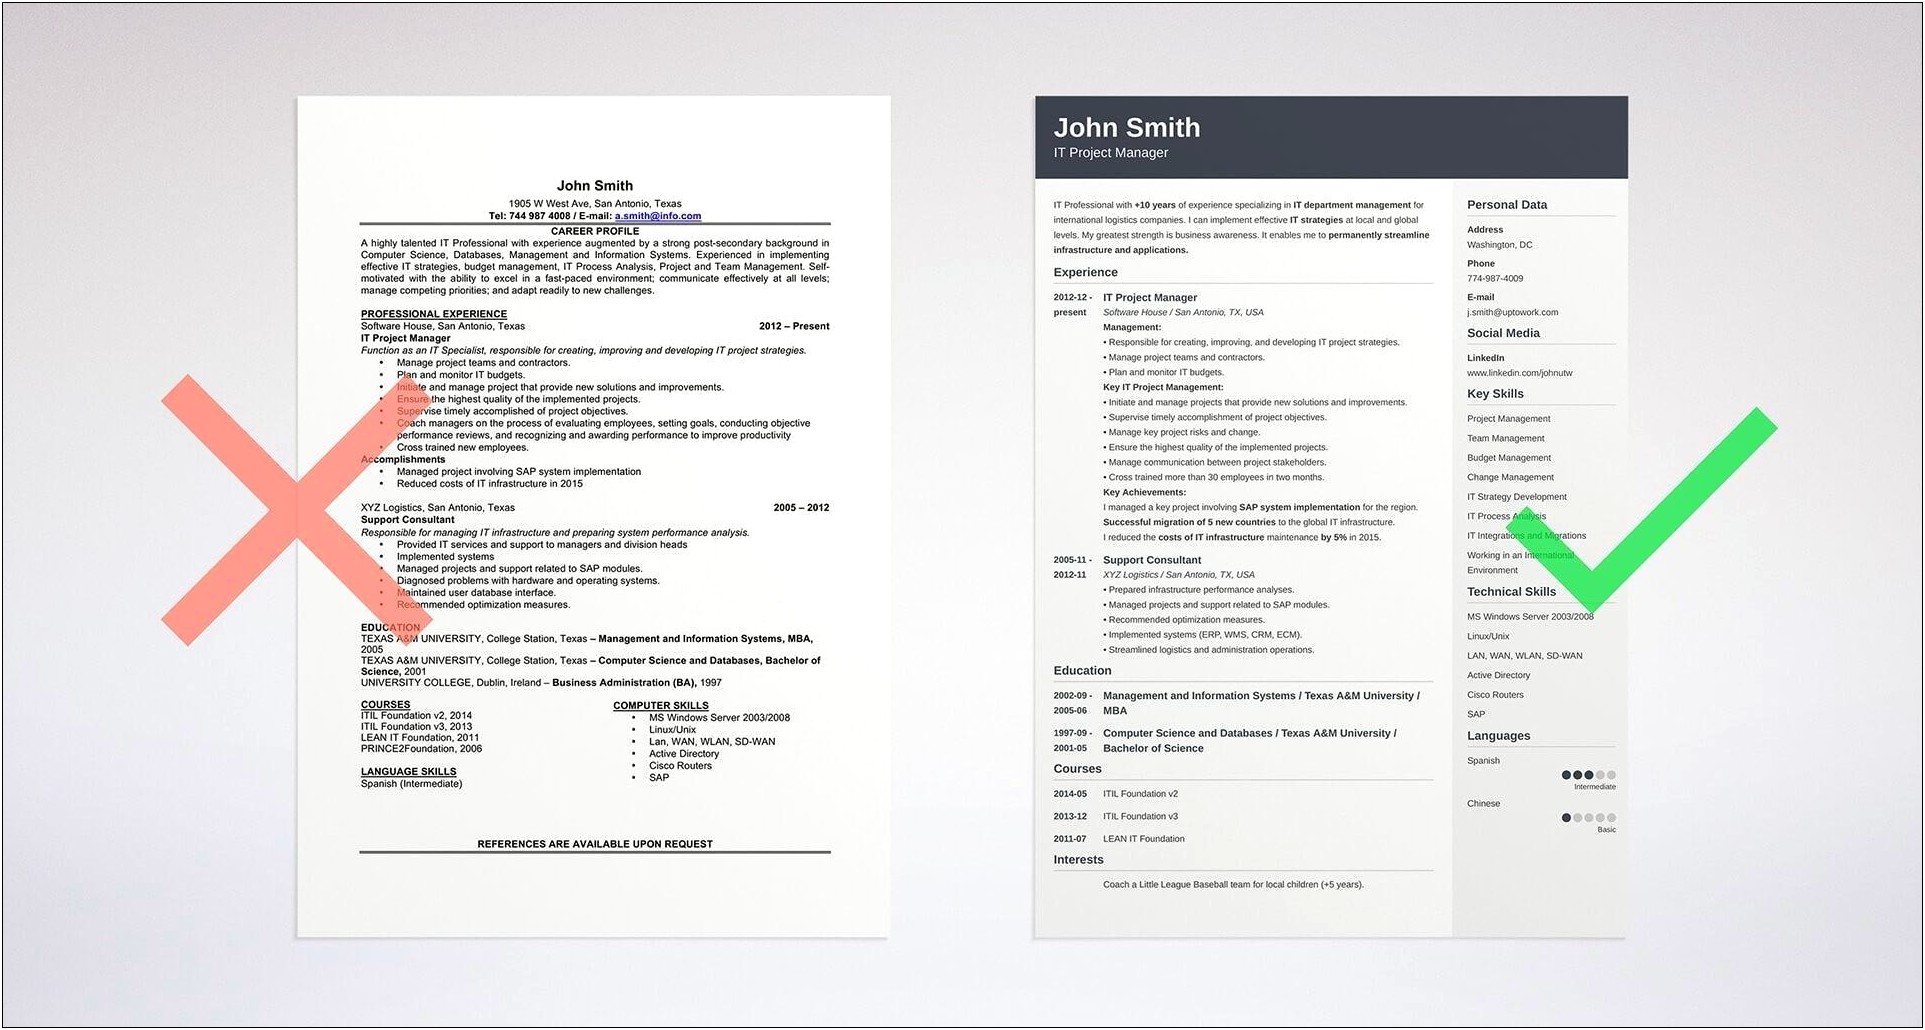 Resume Objective Samples For Experienced Professionals